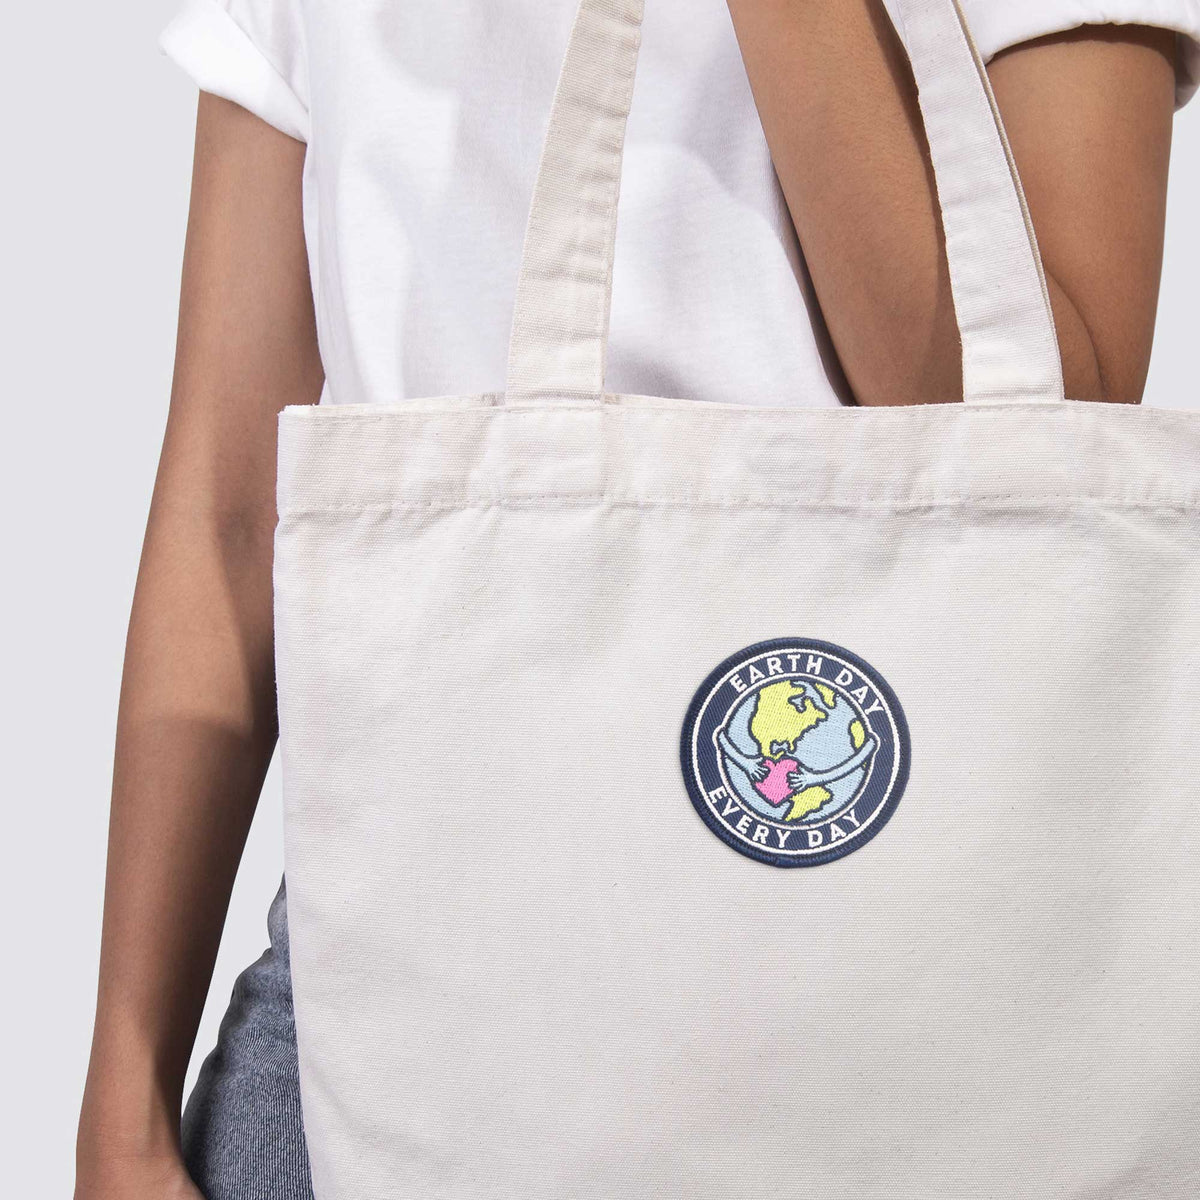 Earth Day Every Day patch on tote bag